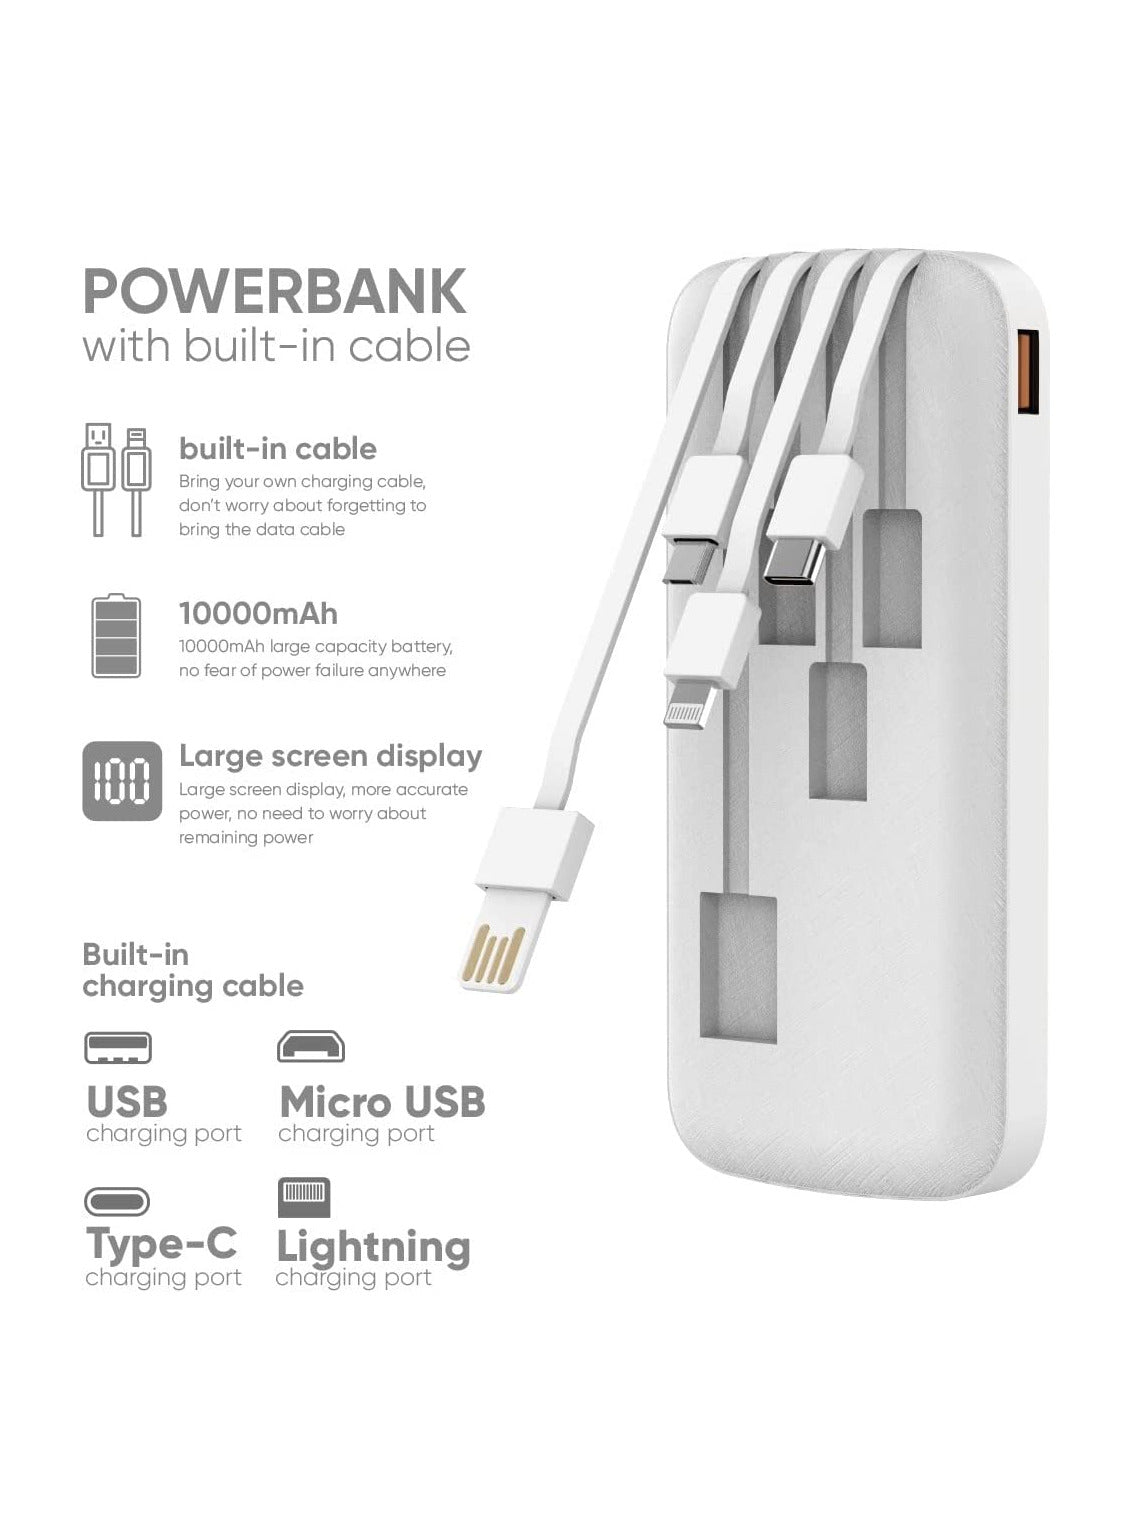 VIDVIE Power bank 4 in 1-10,000 mAh 10W - 4 Built in cables (USB, Lighting, Type C, Micro) Digital Screen, For iPhone & Android Phones